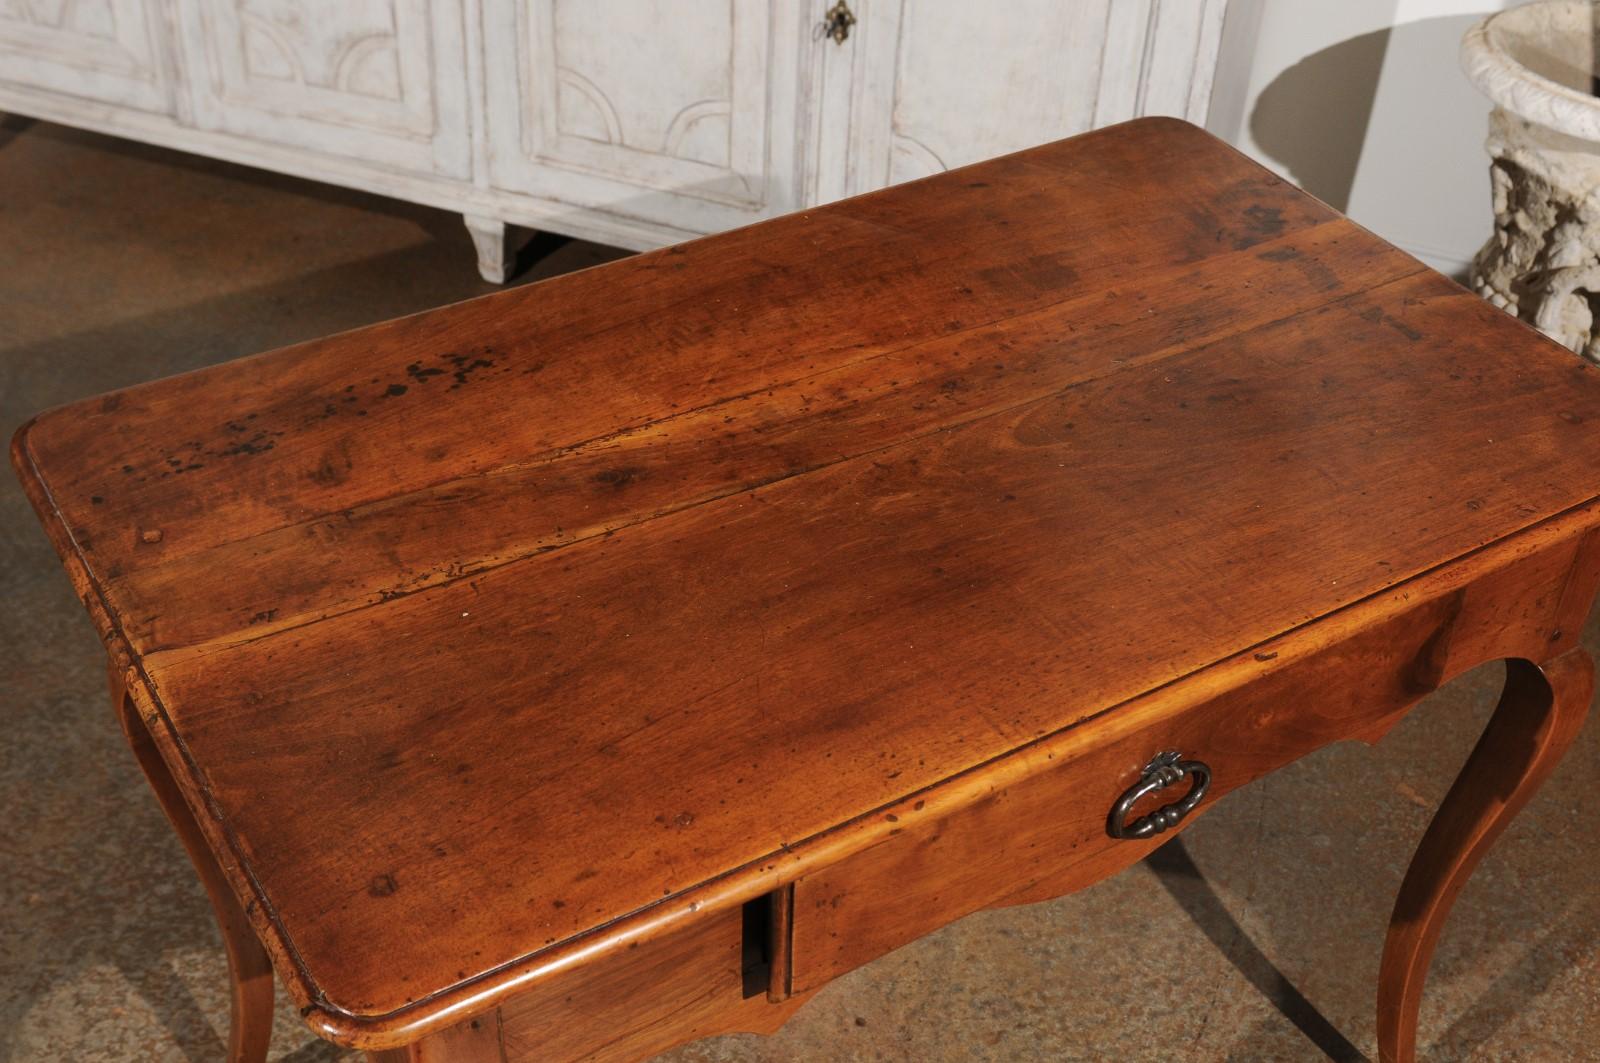 18th Century and Earlier French Period Louis XV 18th Century Walnut Table with Drawer and Cabriole Legs